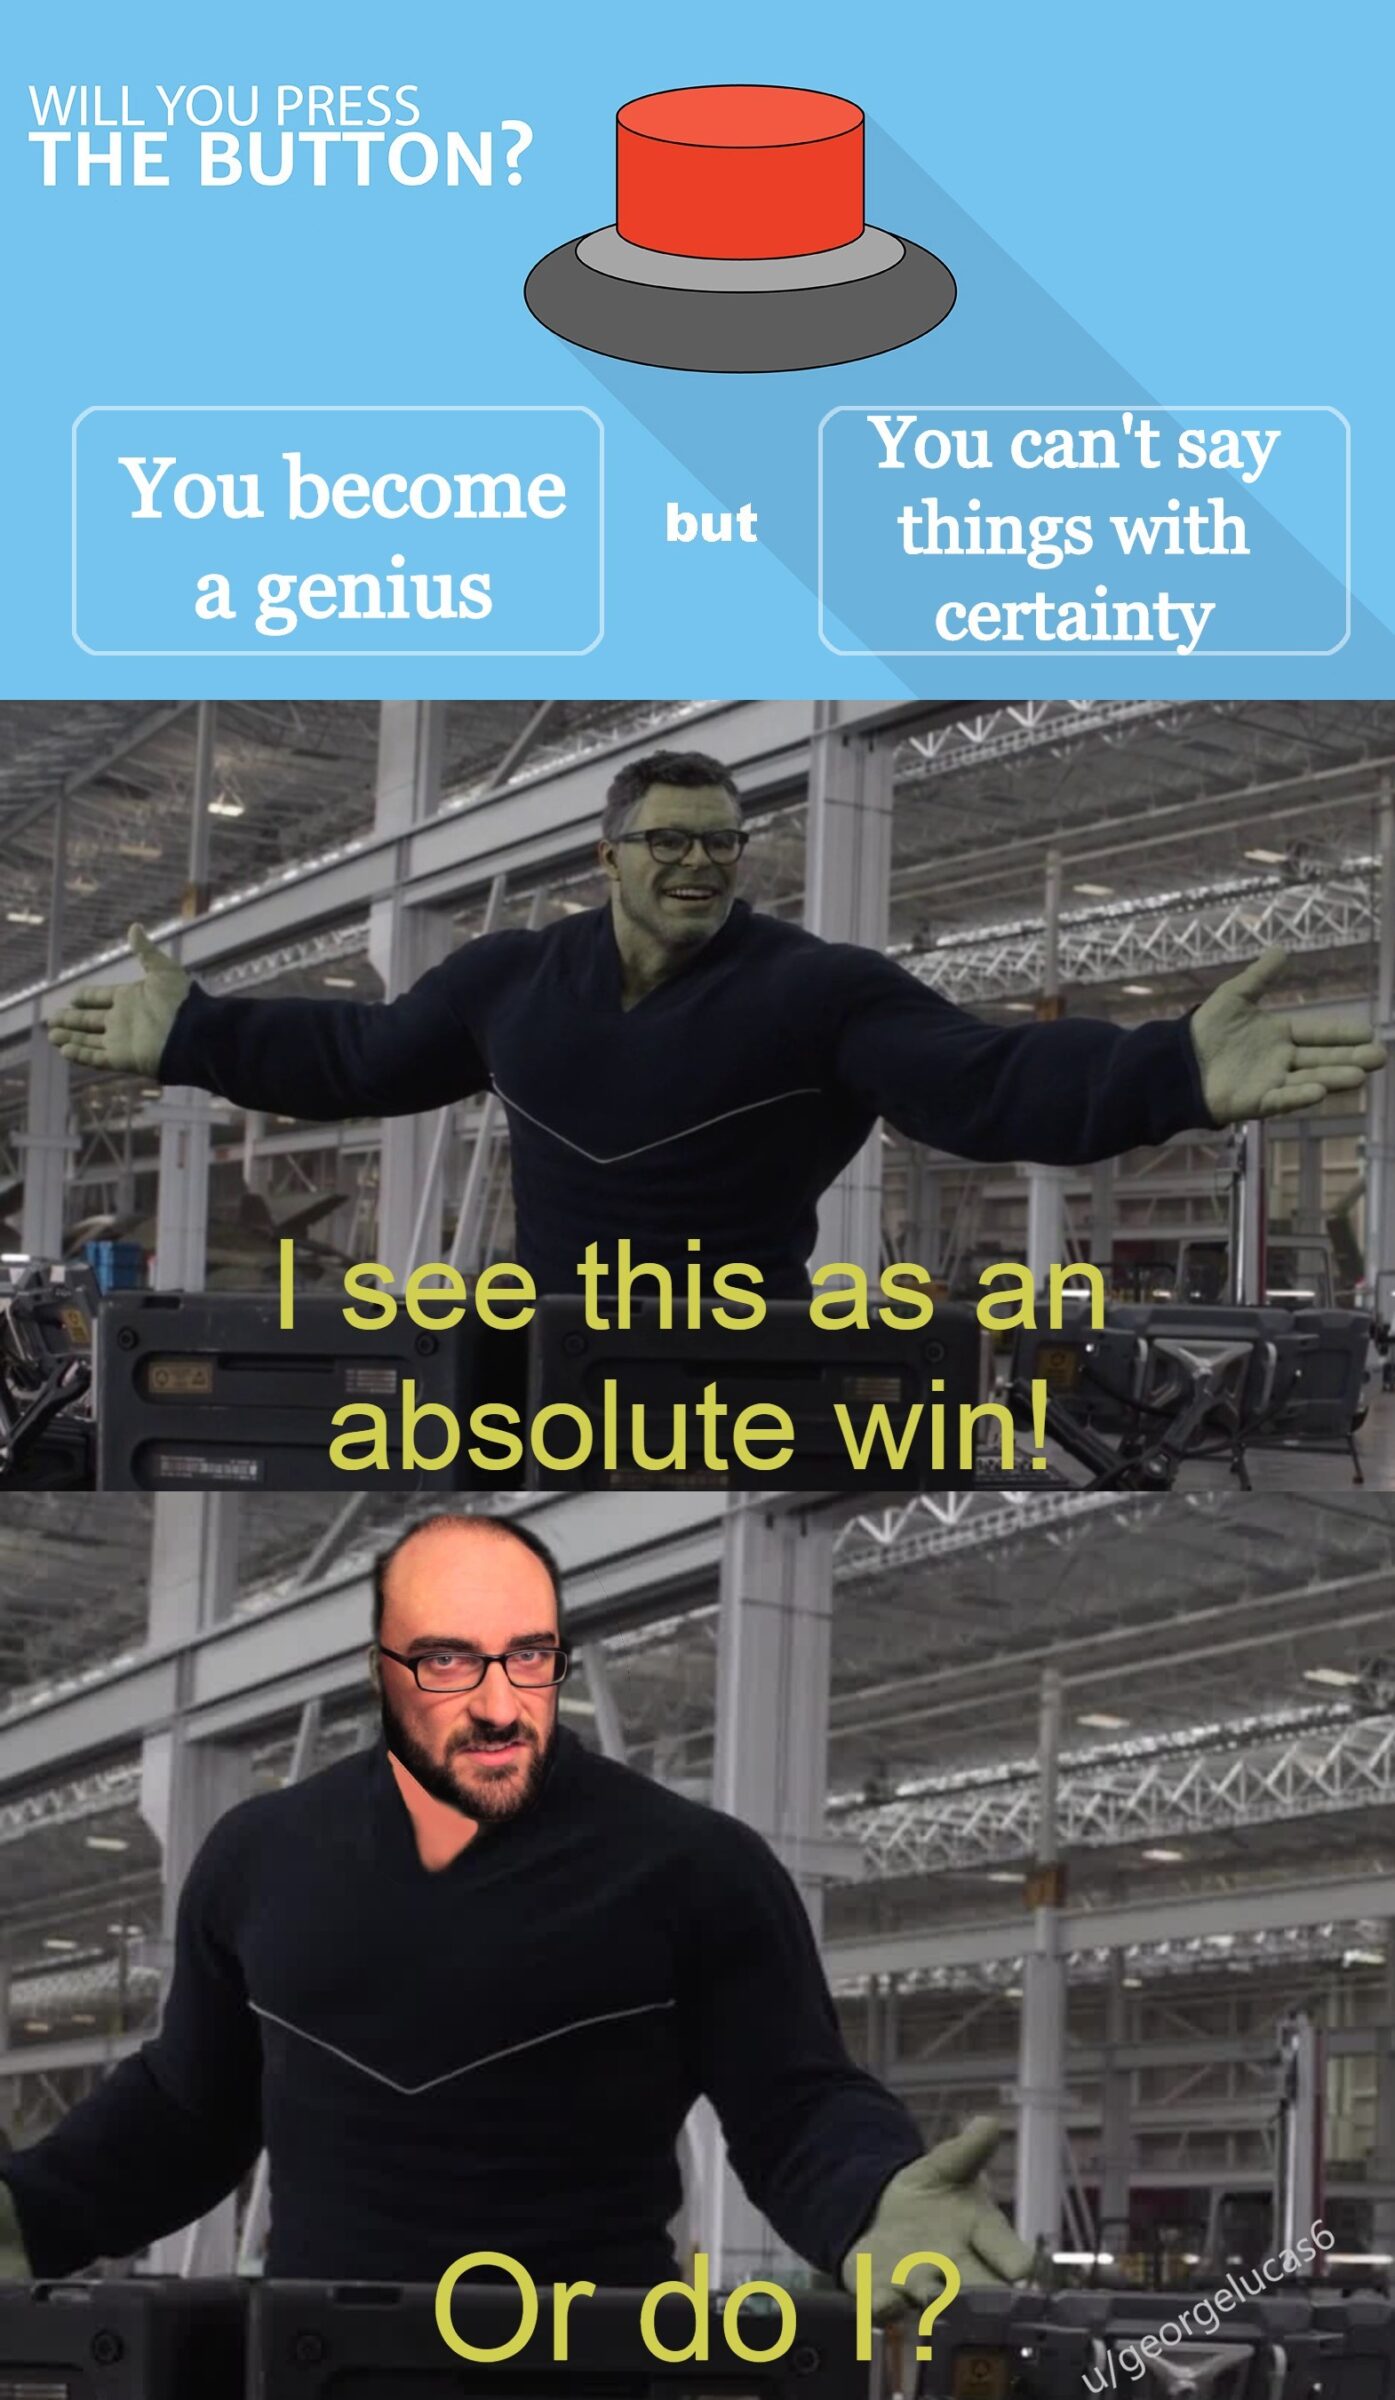 Dank, Vsauce, Michael, VA1, TN2, QA Dank Memes Dank, Vsauce, Michael, VA1, TN2, QA text: YOU PRESS •HE BUTTON? You become a genius but You can't say things with certain Is e this s N absolute win! Ordo 